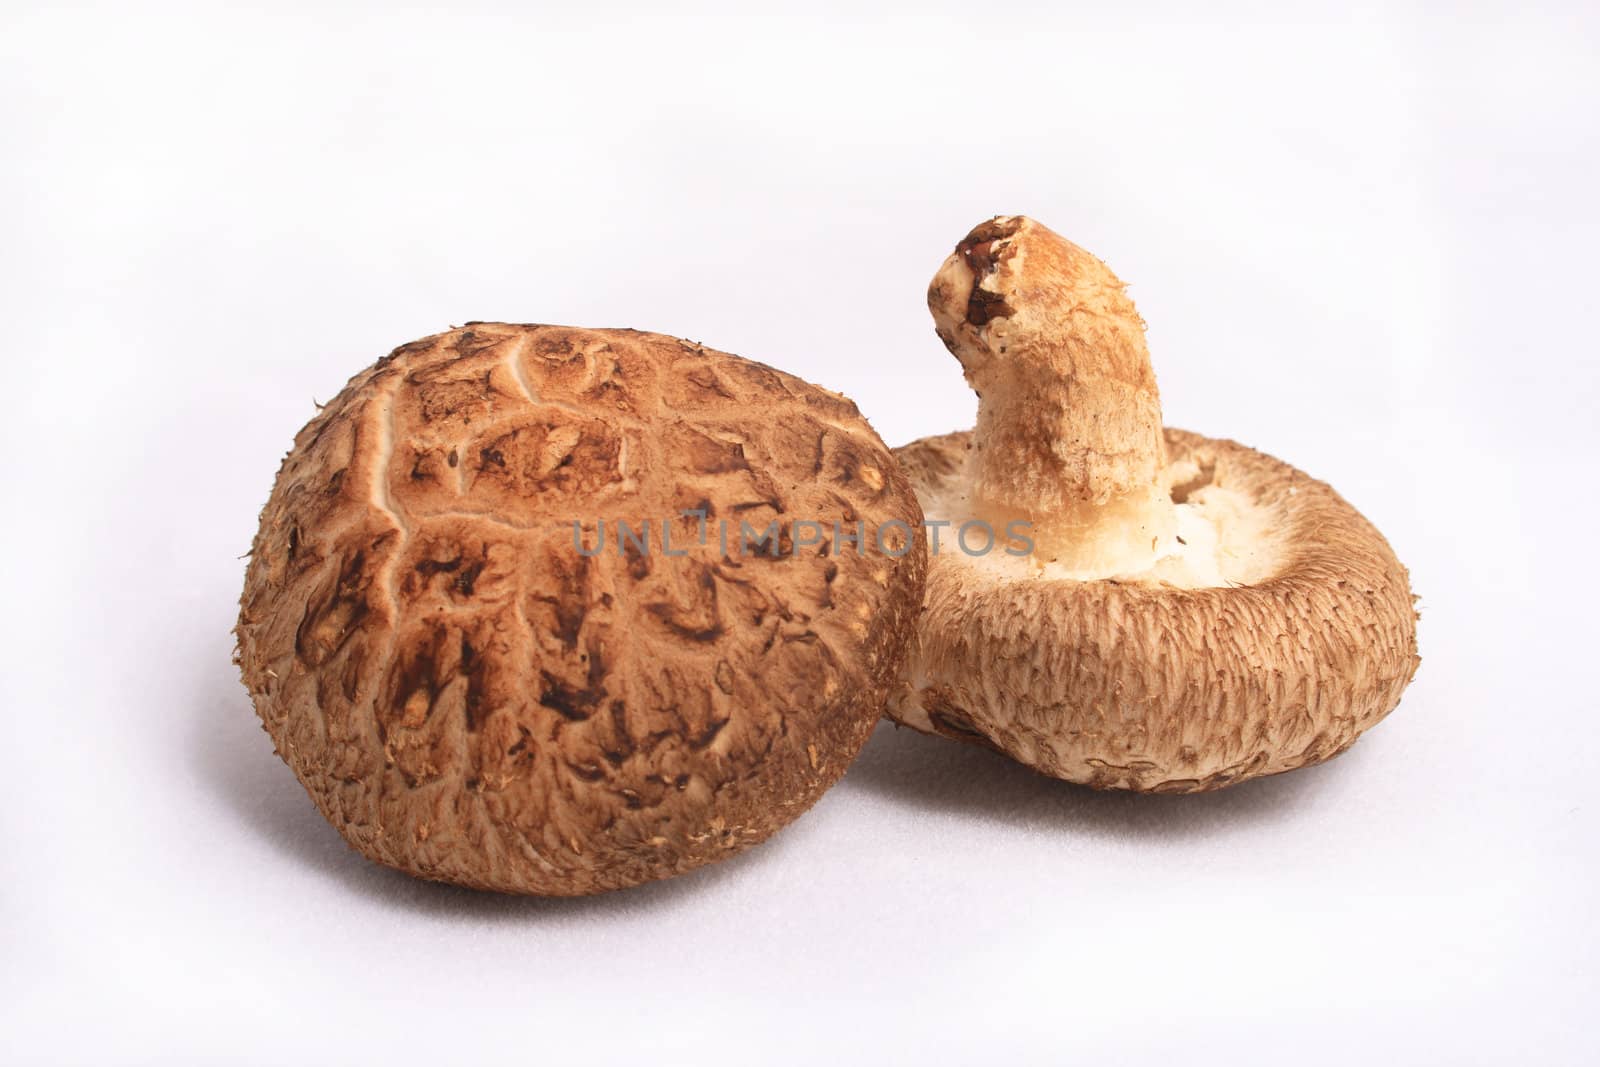 Two dry mushrooms on white background